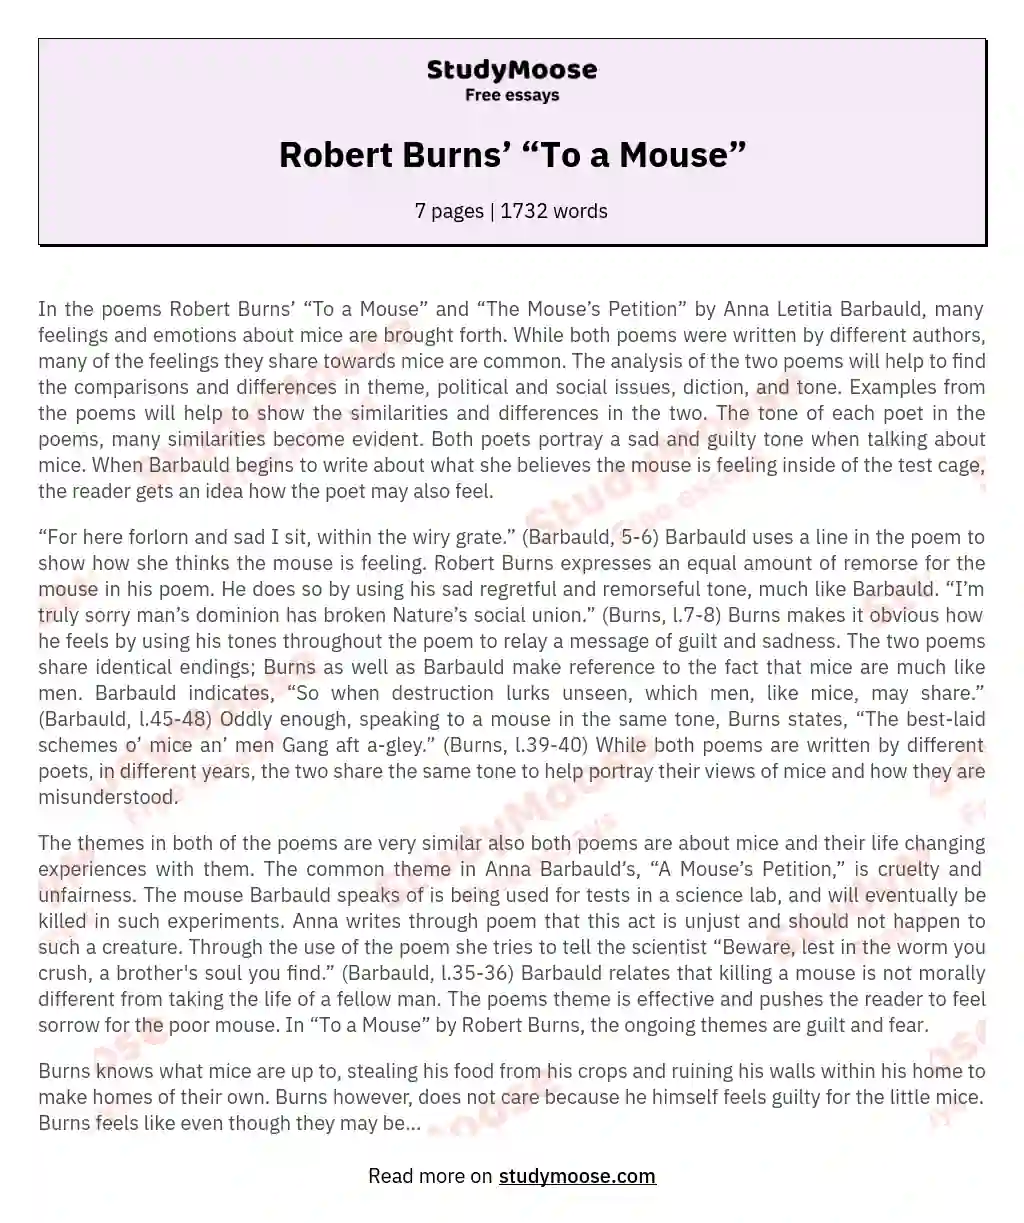 robbie burns poem to a mouse